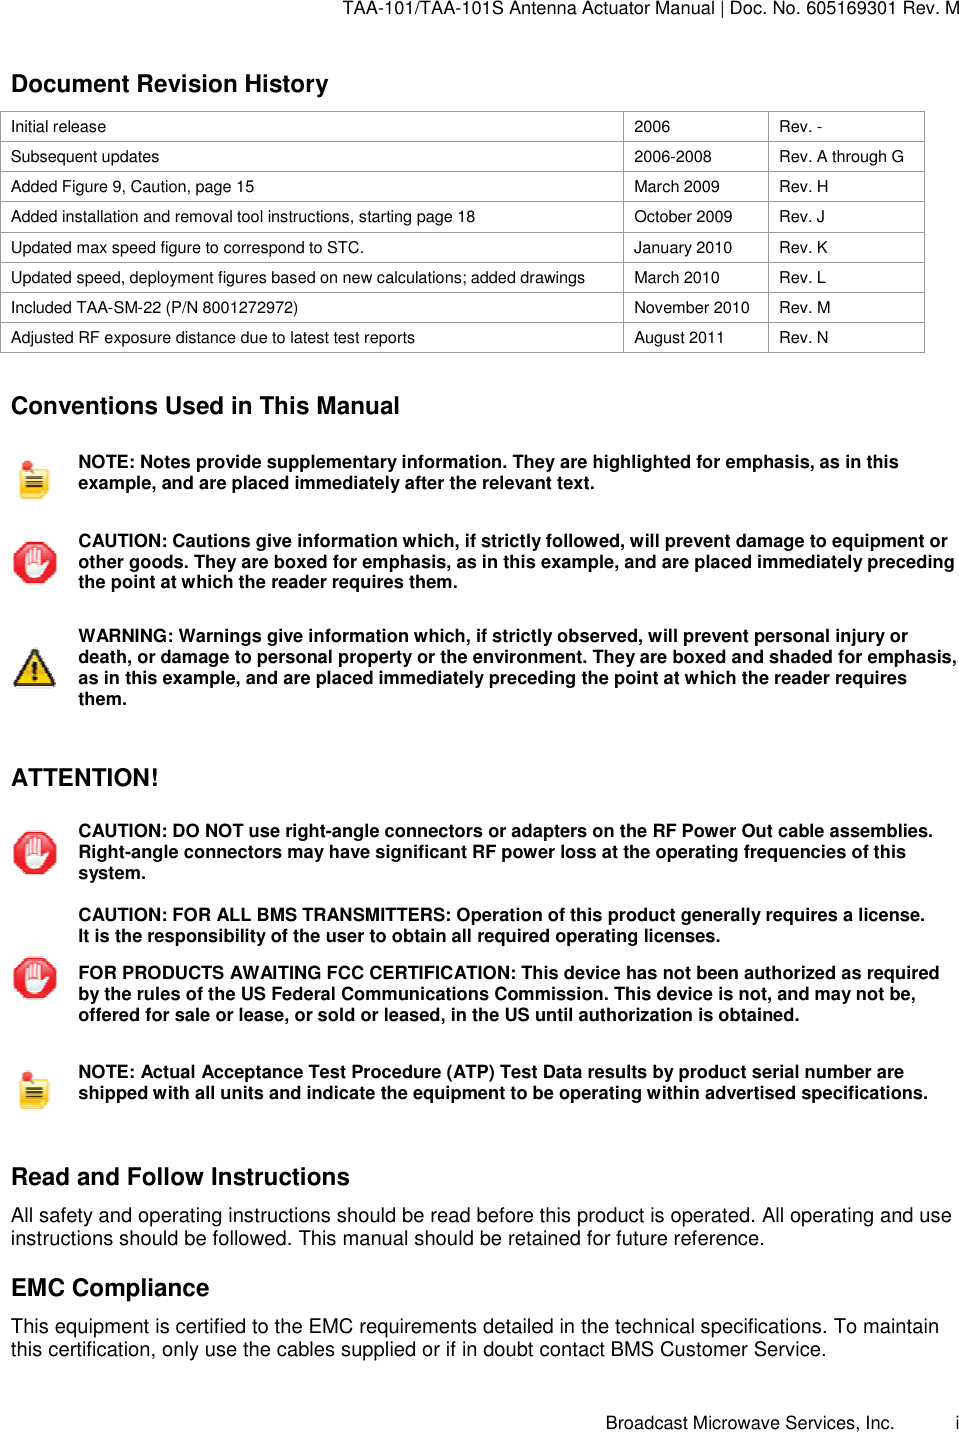 TAA-101/TAA-101S Antenna Actuator Manual | Doc. No. 605169301 Rev. M Broadcast Microwave Services, Inc.      i Document Revision History Initial release  2006  Rev. - Subsequent updates  2006-2008  Rev. A through G Added Figure 9, Caution, page 15  March 2009  Rev. H Added installation and removal tool instructions, starting page 18  October 2009  Rev. J Updated max speed figure to correspond to STC.  January 2010  Rev. K Updated speed, deployment figures based on new calculations; added drawings  March 2010  Rev. L Included TAA-SM-22 (P/N 8001272972)  November 2010  Rev. M Adjusted RF exposure distance due to latest test reports  August 2011  Rev. N  Conventions Used in This Manual  NOTE: Notes provide supplementary information. They are highlighted for emphasis, as in this example, and are placed immediately after the relevant text.   CAUTION: Cautions give information which, if strictly followed, will prevent damage to equipment or other goods. They are boxed for emphasis, as in this example, and are placed immediately preceding the point at which the reader requires them.   WARNING: Warnings give information which, if strictly observed, will prevent personal injury or death, or damage to personal property or the environment. They are boxed and shaded for emphasis, as in this example, and are placed immediately preceding the point at which the reader requires them.   ATTENTION!  CAUTION: DO NOT use right-angle connectors or adapters on the RF Power Out cable assemblies. Right-angle connectors may have significant RF power loss at the operating frequencies of this system.  CAUTION: FOR ALL BMS TRANSMITTERS: Operation of this product generally requires a license.  It is the responsibility of the user to obtain all required operating licenses.  FOR PRODUCTS AWAITING FCC CERTIFICATION: This device has not been authorized as required by the rules of the US Federal Communications Commission. This device is not, and may not be, offered for sale or lease, or sold or leased, in the US until authorization is obtained.  NOTE: Actual Acceptance Test Procedure (ATP) Test Data results by product serial number are shipped with all units and indicate the equipment to be operating within advertised specifications.   Read and Follow Instructions All safety and operating instructions should be read before this product is operated. All operating and use instructions should be followed. This manual should be retained for future reference. EMC Compliance This equipment is certified to the EMC requirements detailed in the technical specifications. To maintain this certification, only use the cables supplied or if in doubt contact BMS Customer Service. 